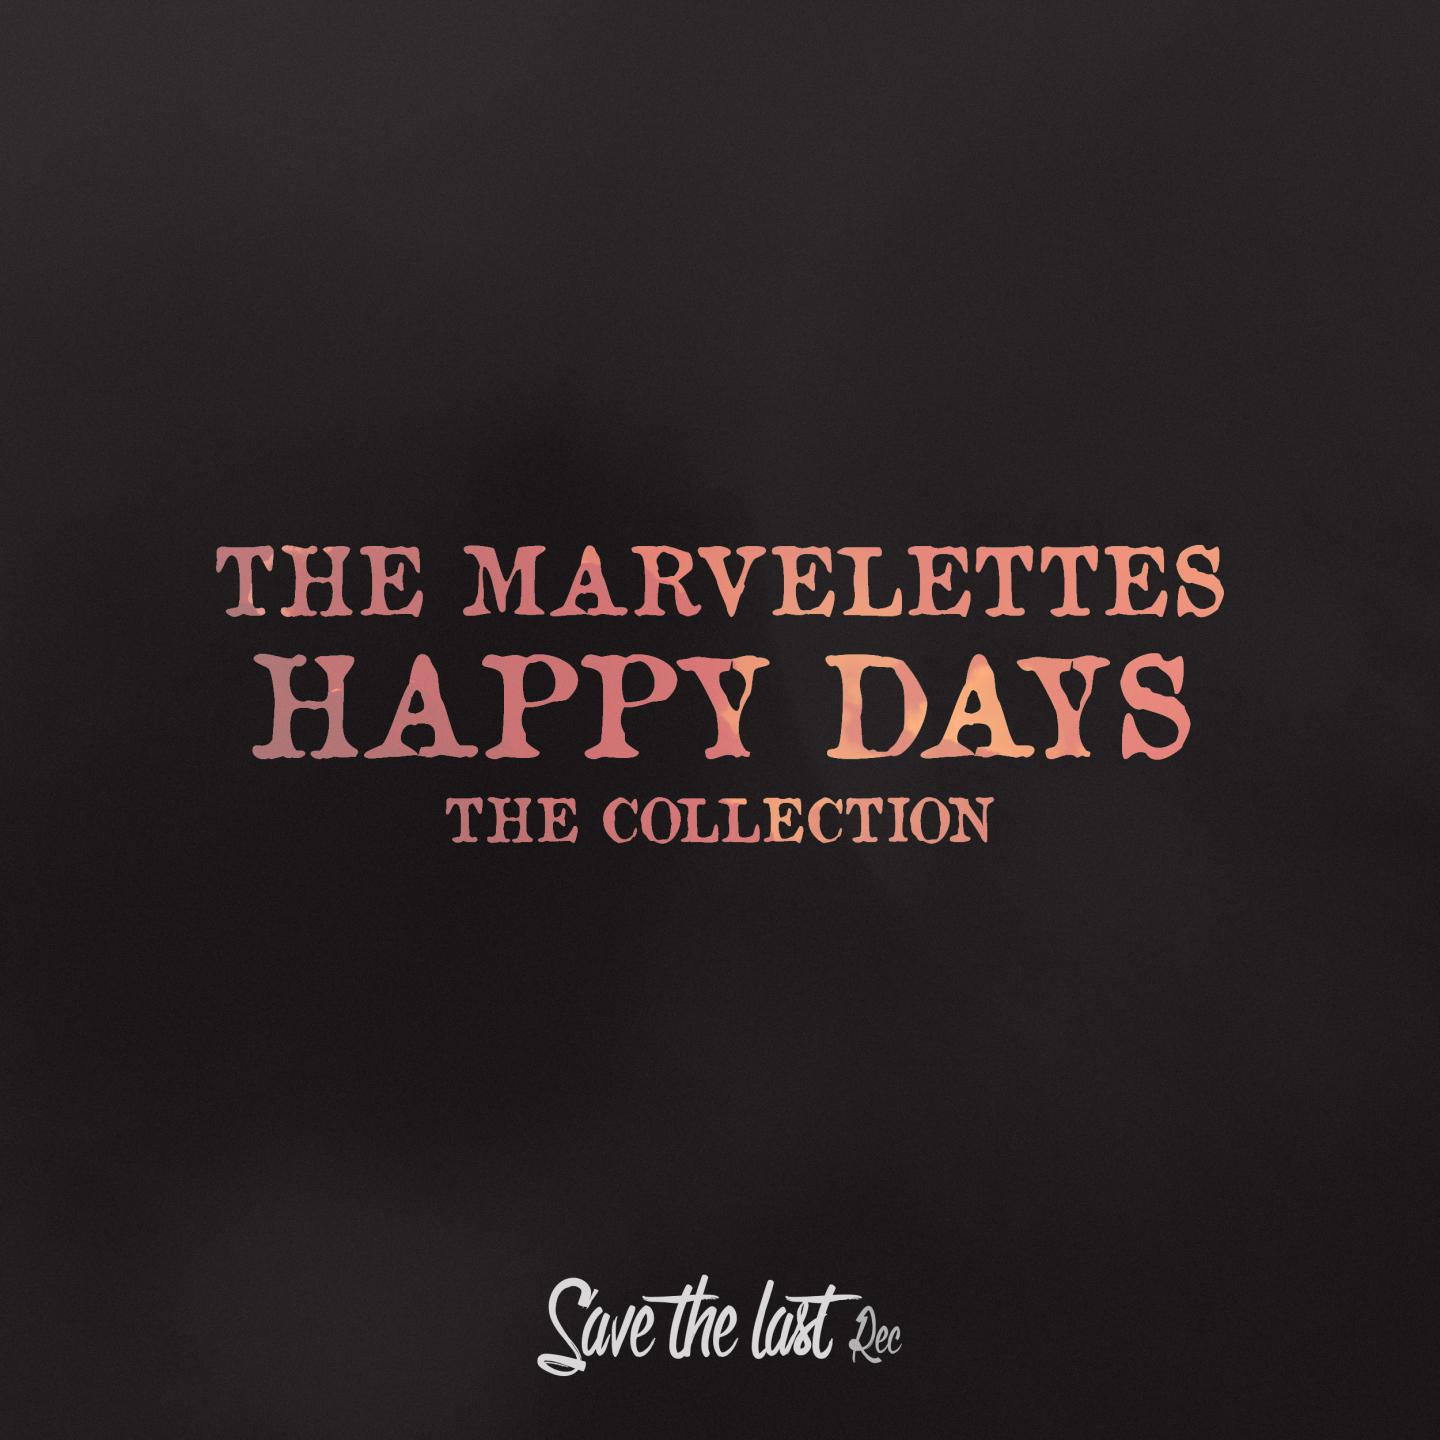 Happy Days (The Collection)专辑